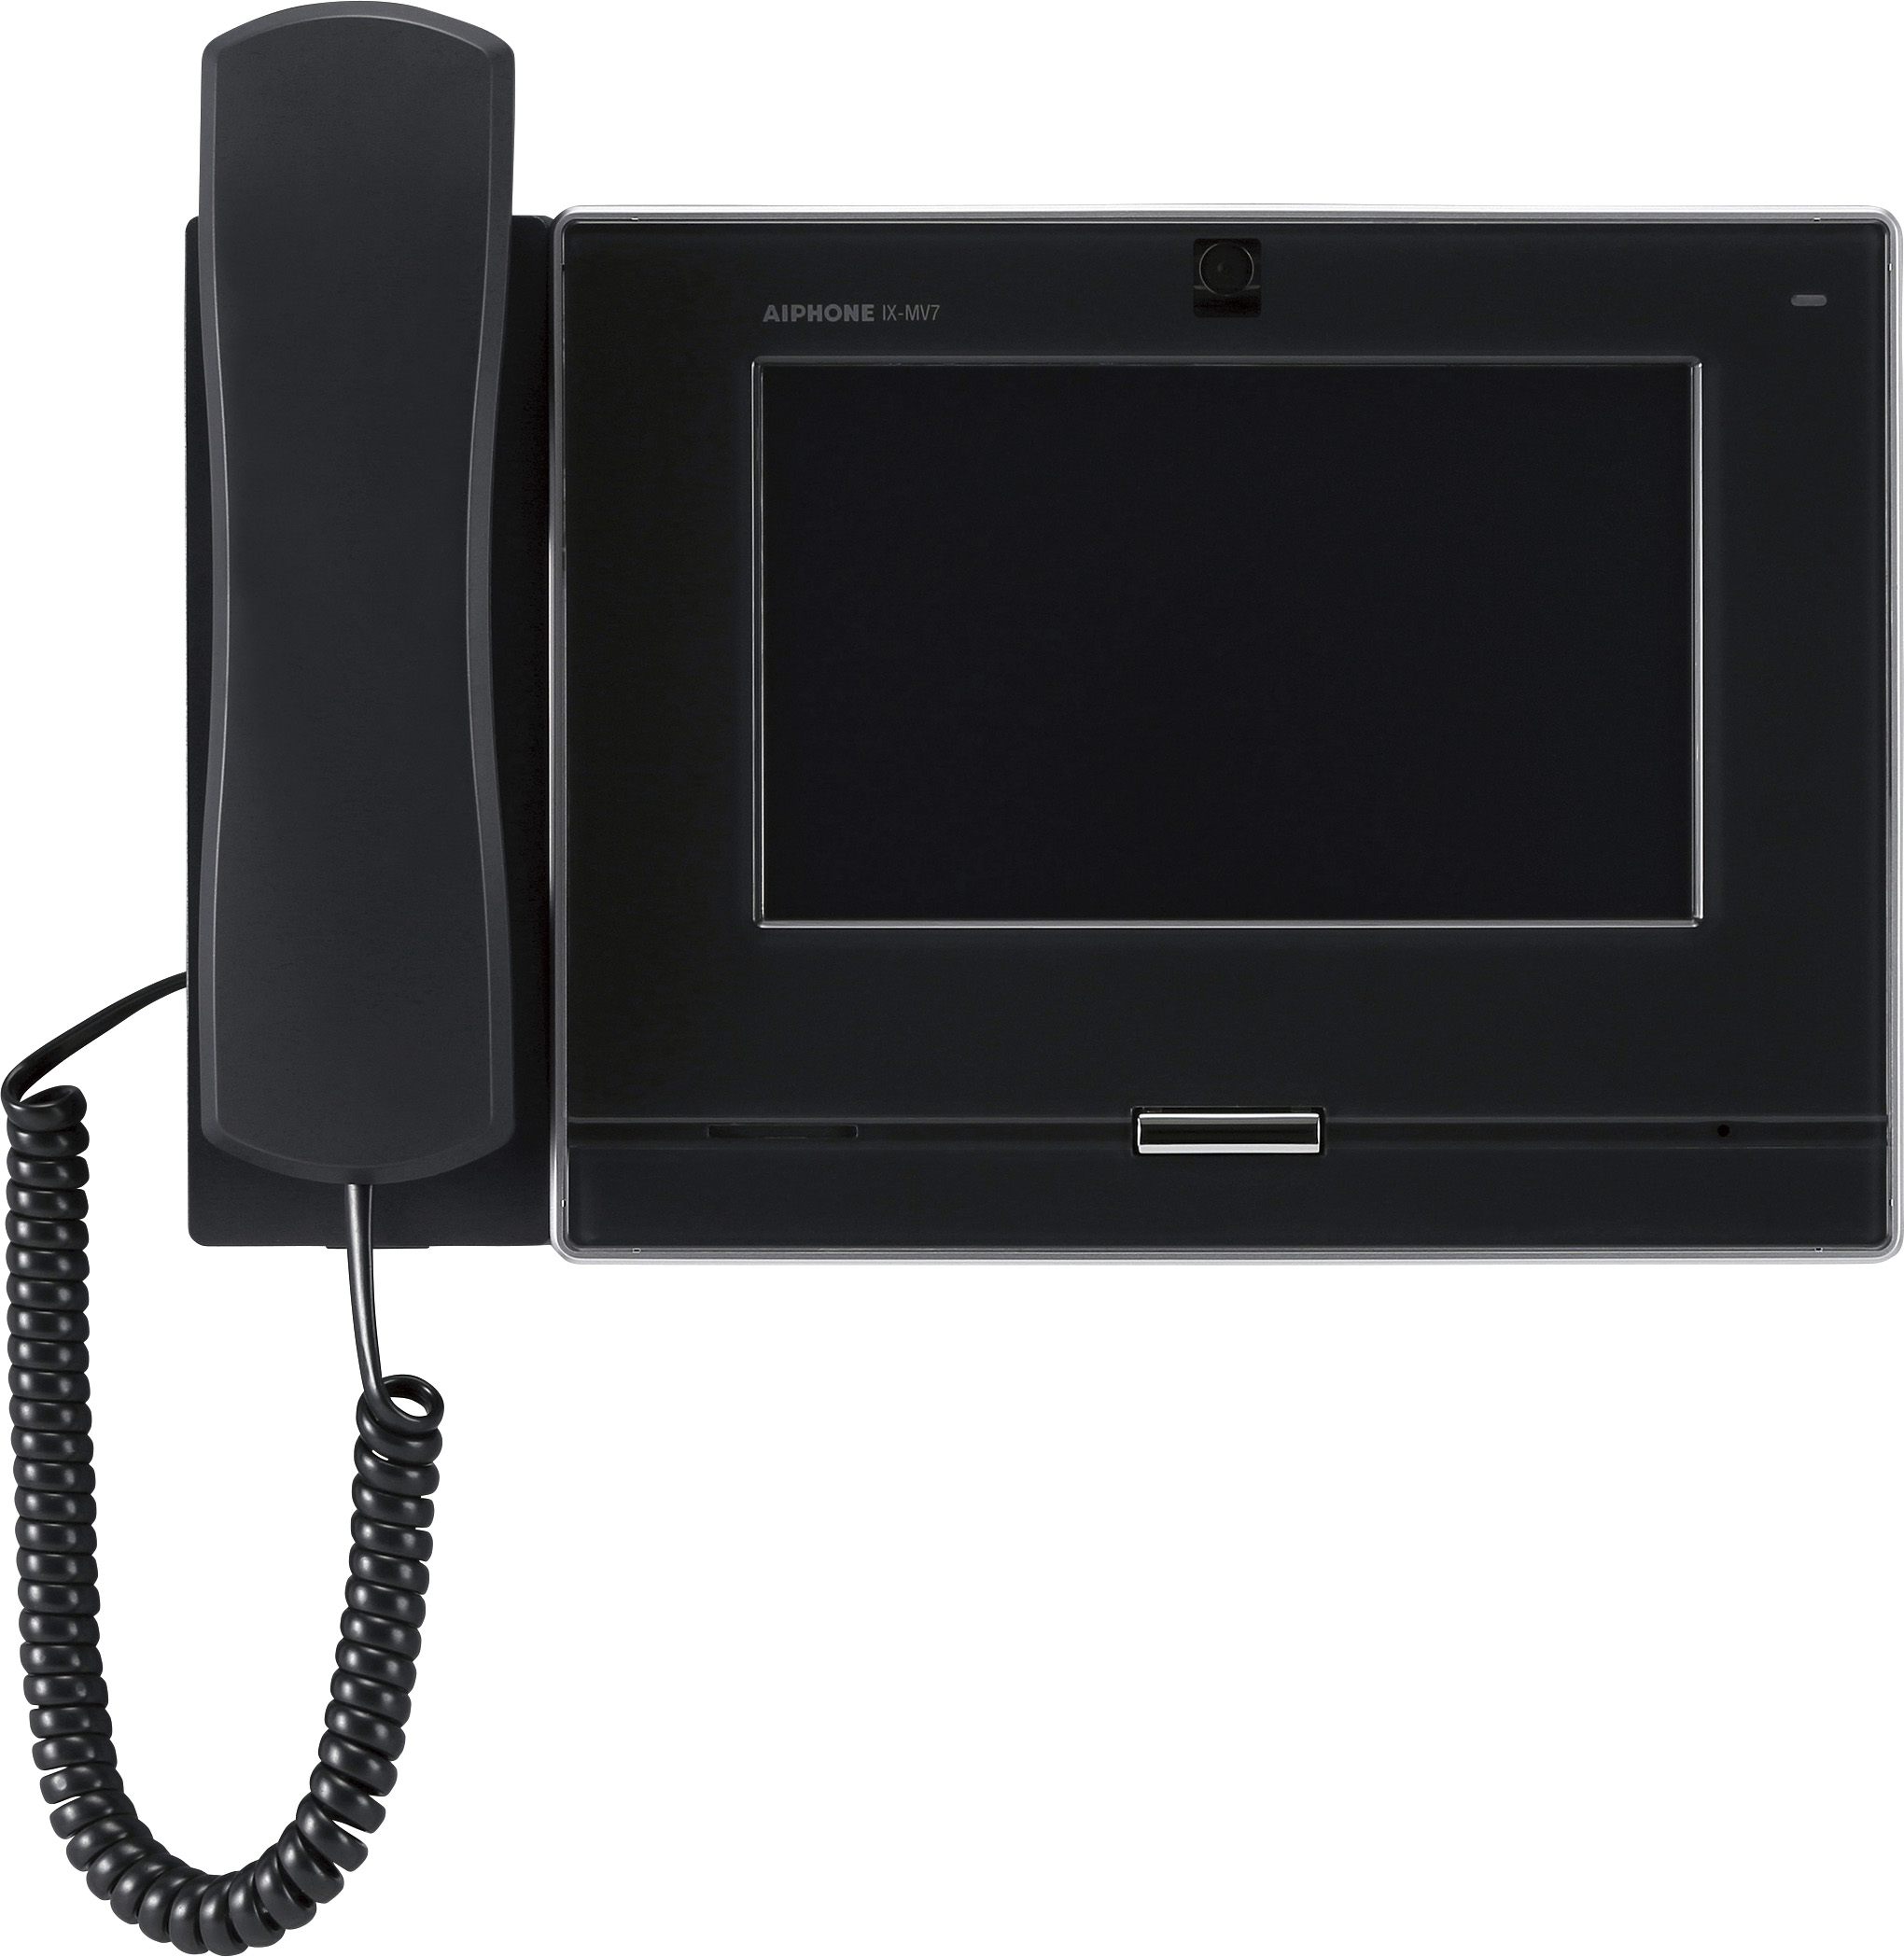 AIPHONE IX SERIES 2 IP INTERCOM MONITOR WITH HANDSET BLACK COMMERCIAL 7 INCH DISPLAY TOUCHSCREEN PLASTIC 48V POE SWITCH